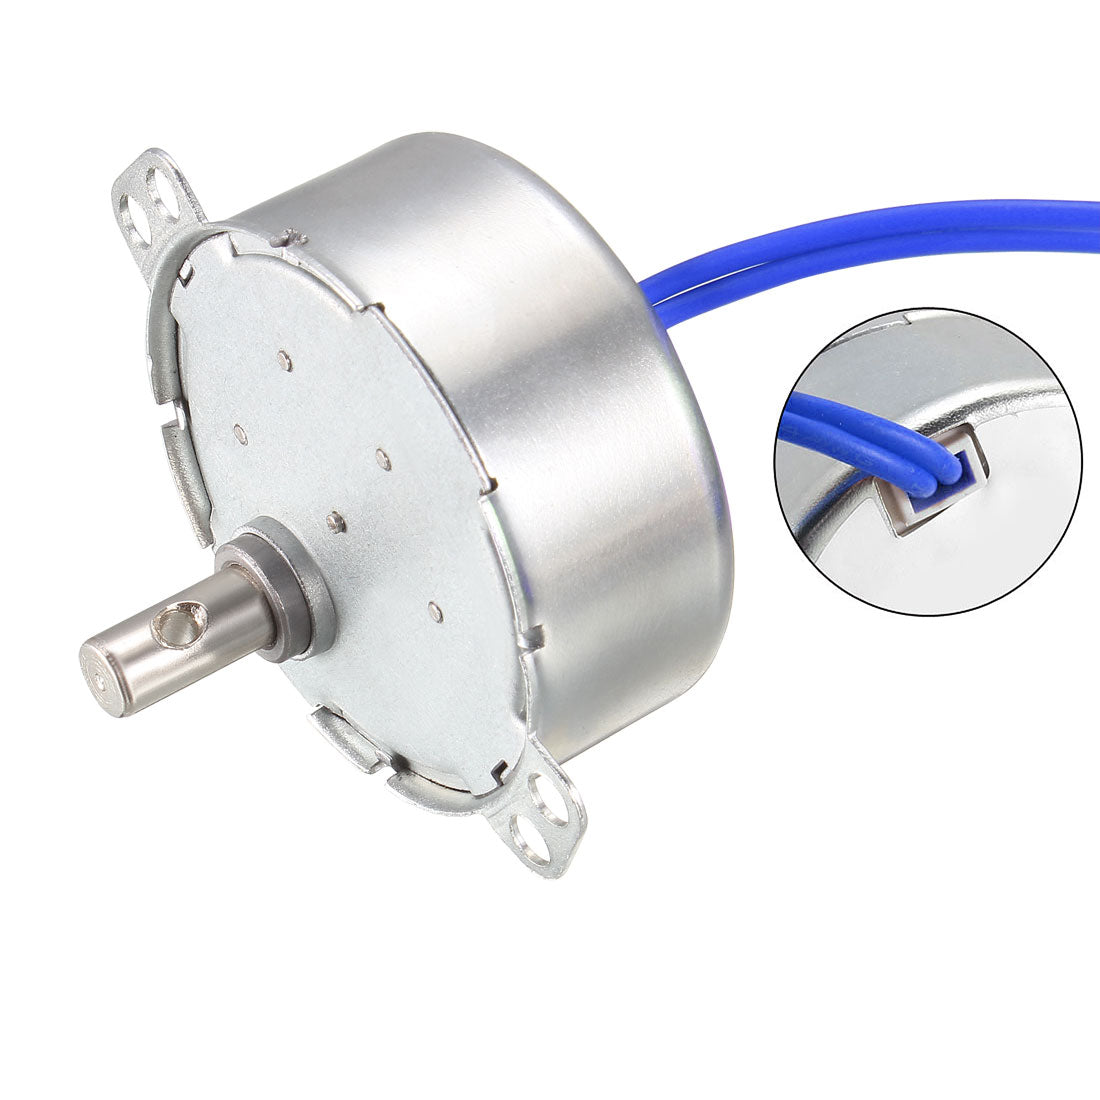 Uxcell Uxcell Metal Gear Electric Synchronous Motor AC 100-127V 1.3-1.5RPM 50-60Hz CCW/CW 4W